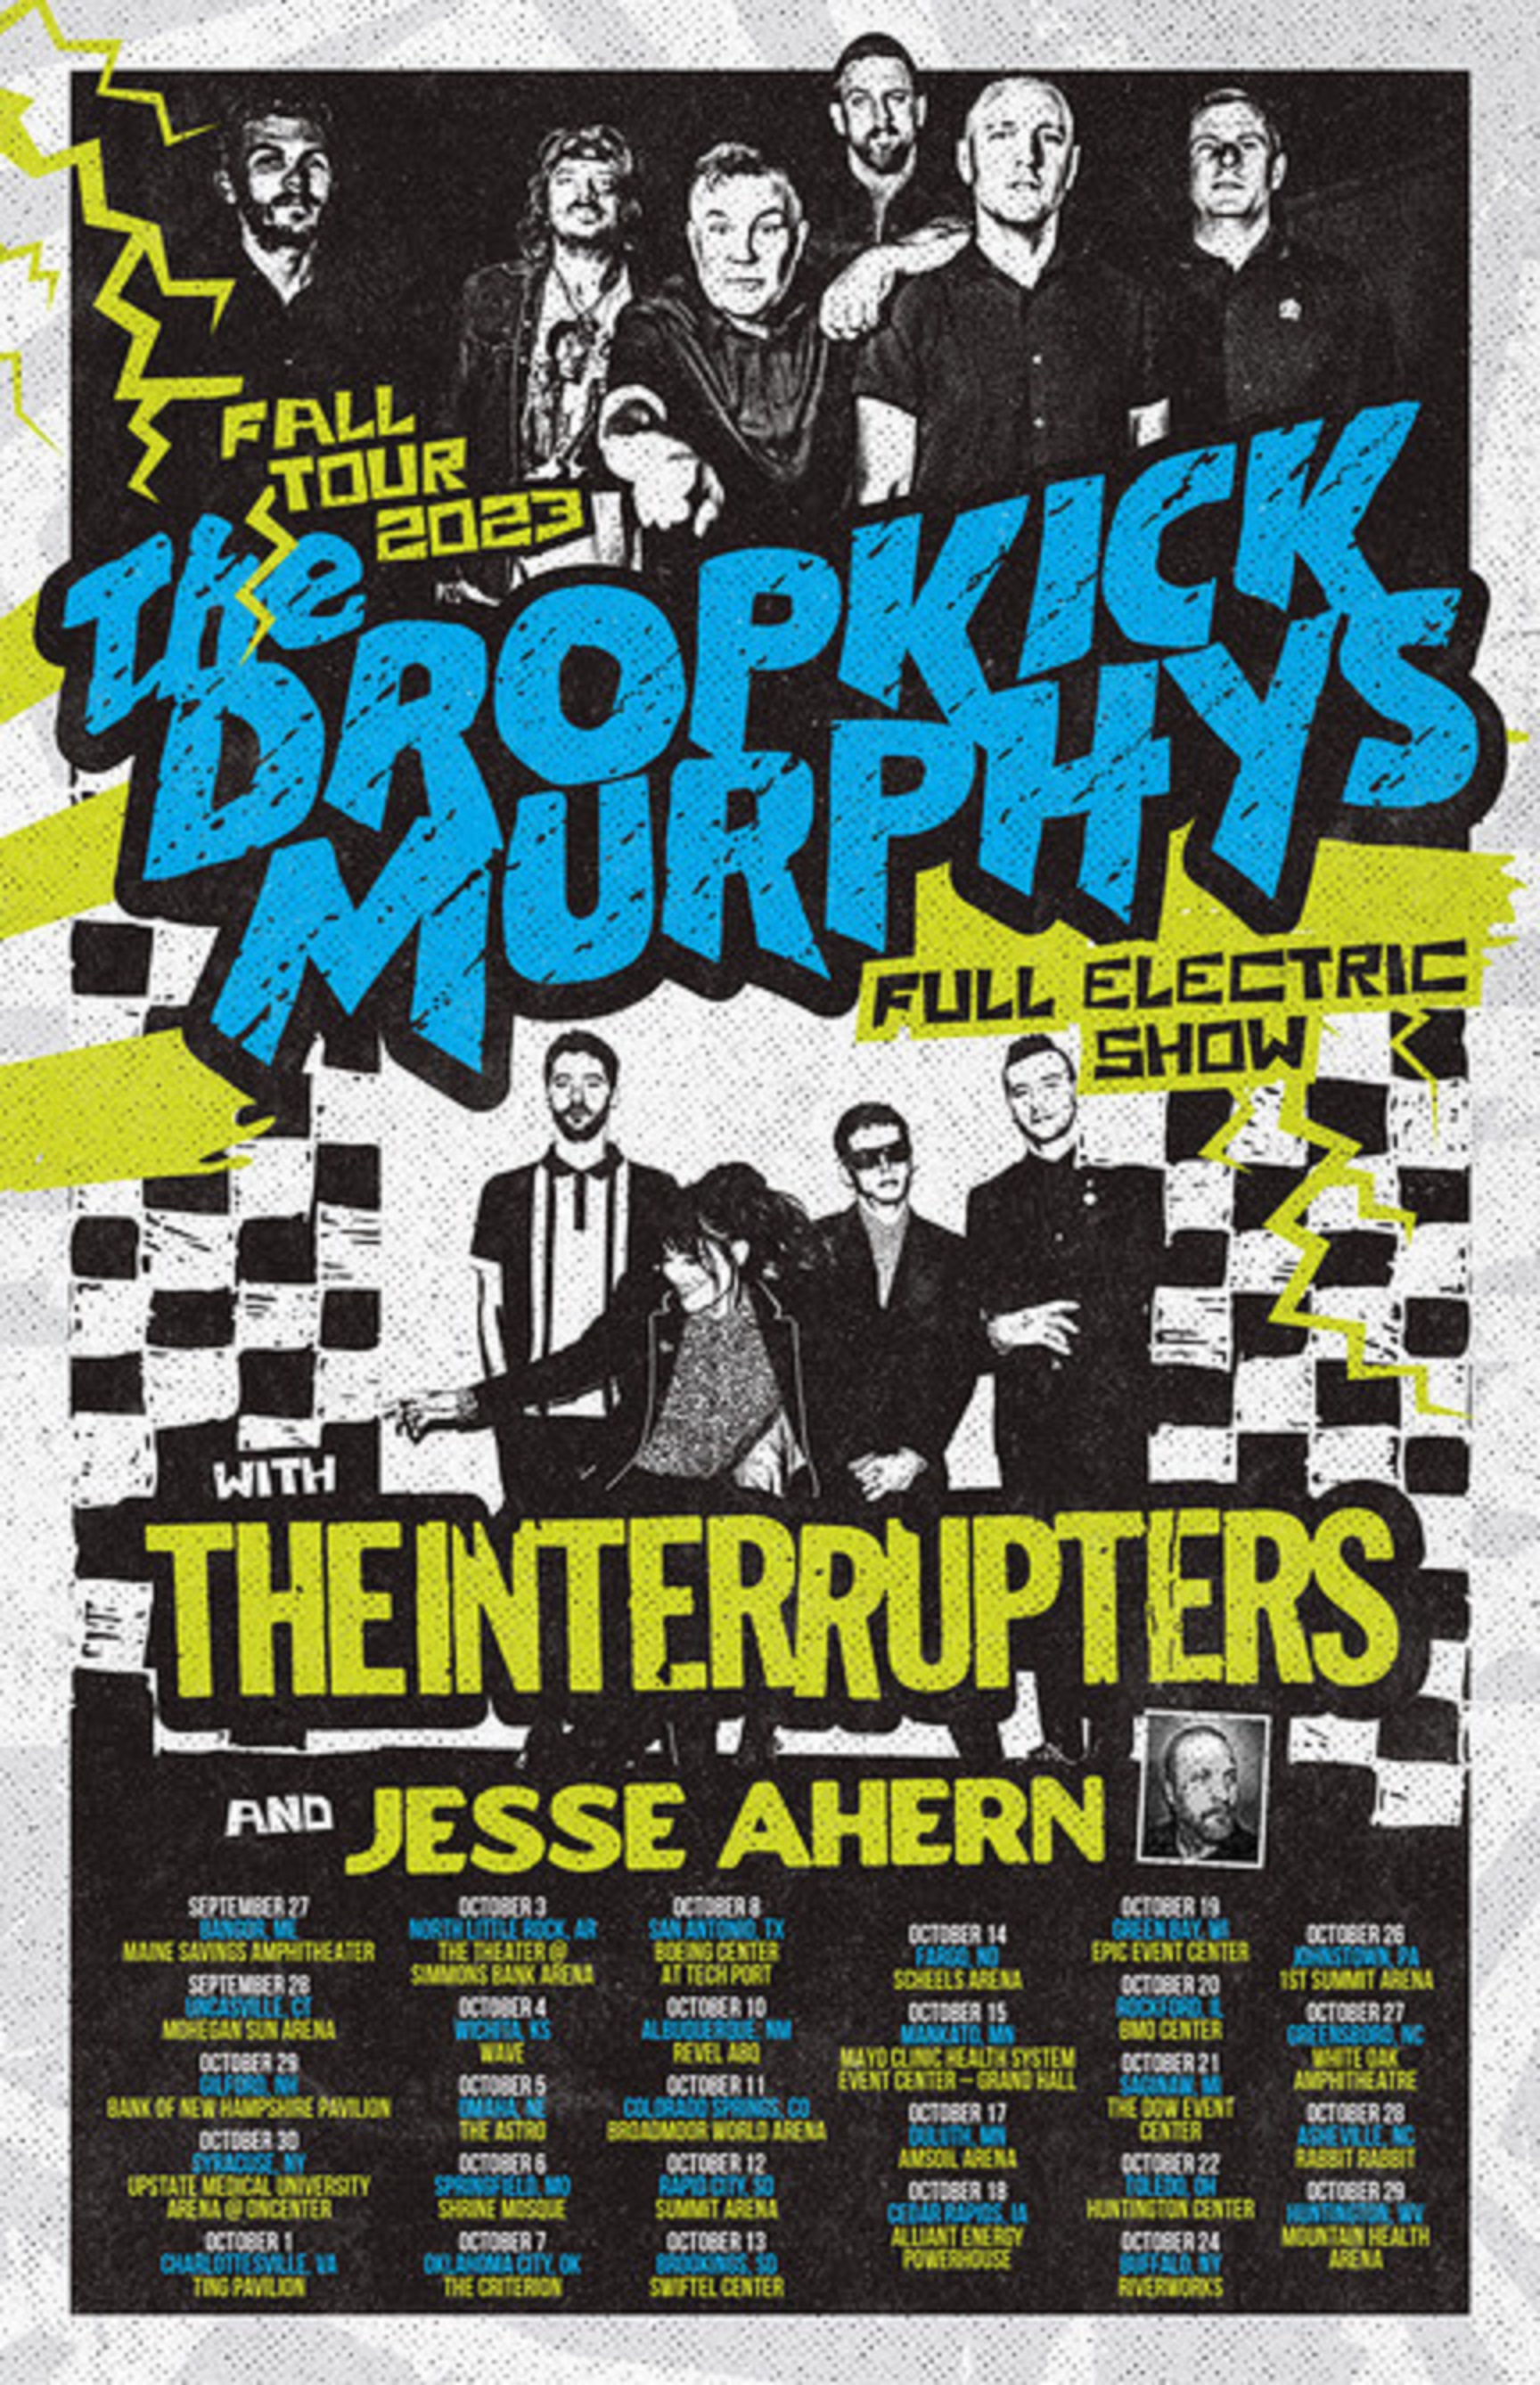 Dropkick Murphys Get Plugged In For Fall U.S. Tour With The ...